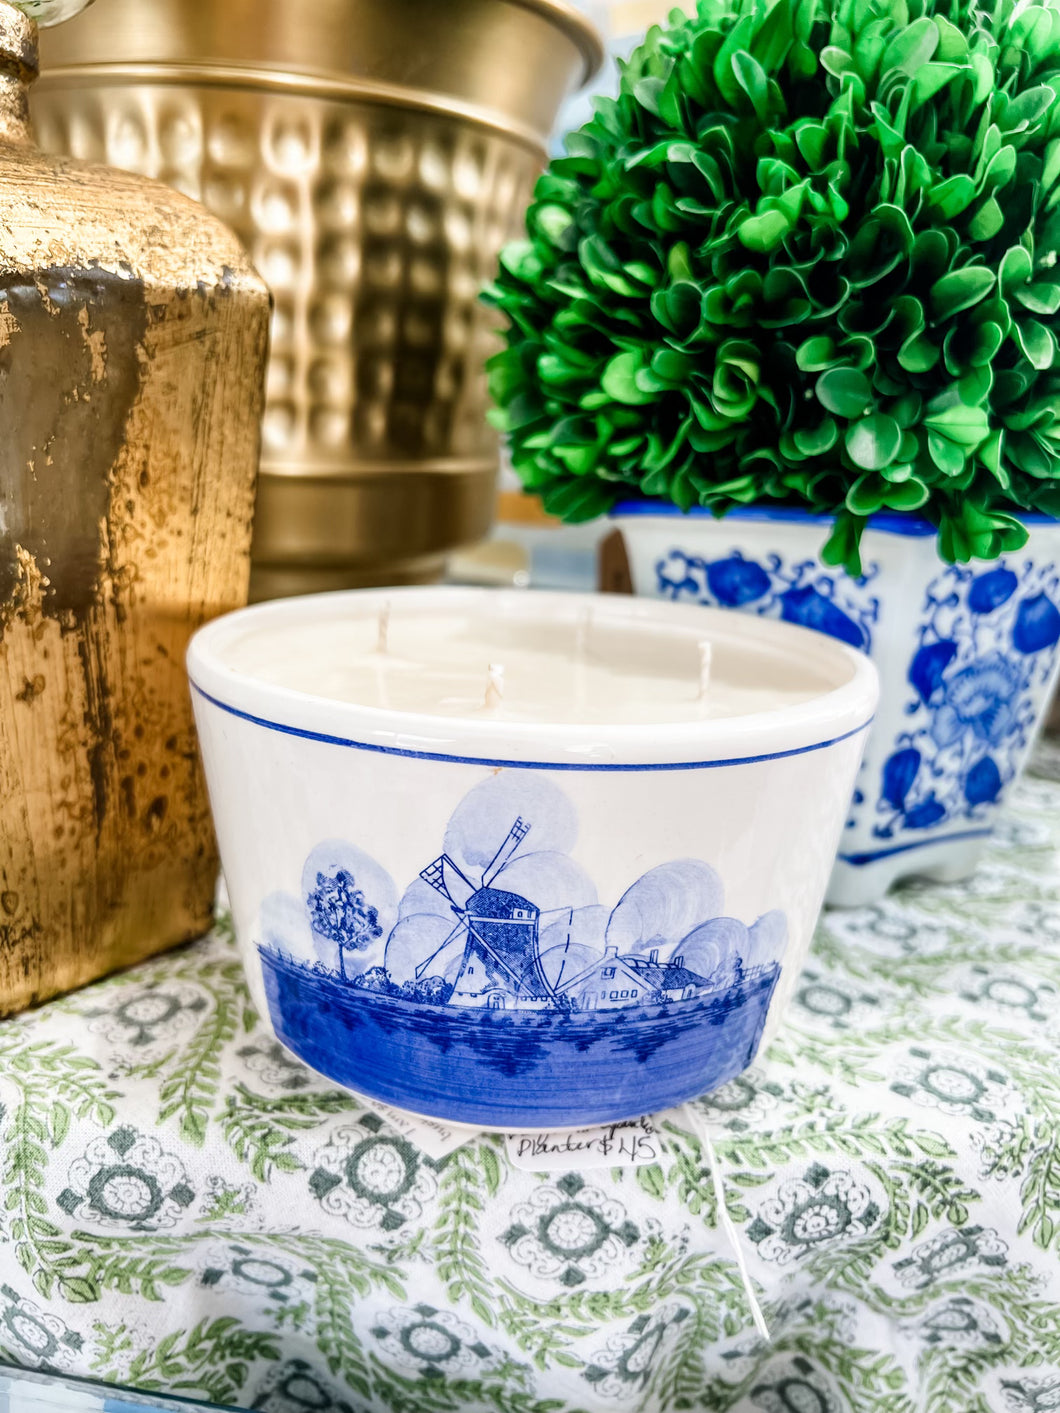 Beautiful Soul Blue and White Handpainted Planter scented candle-Belle Reve Designs by Megan Gatte